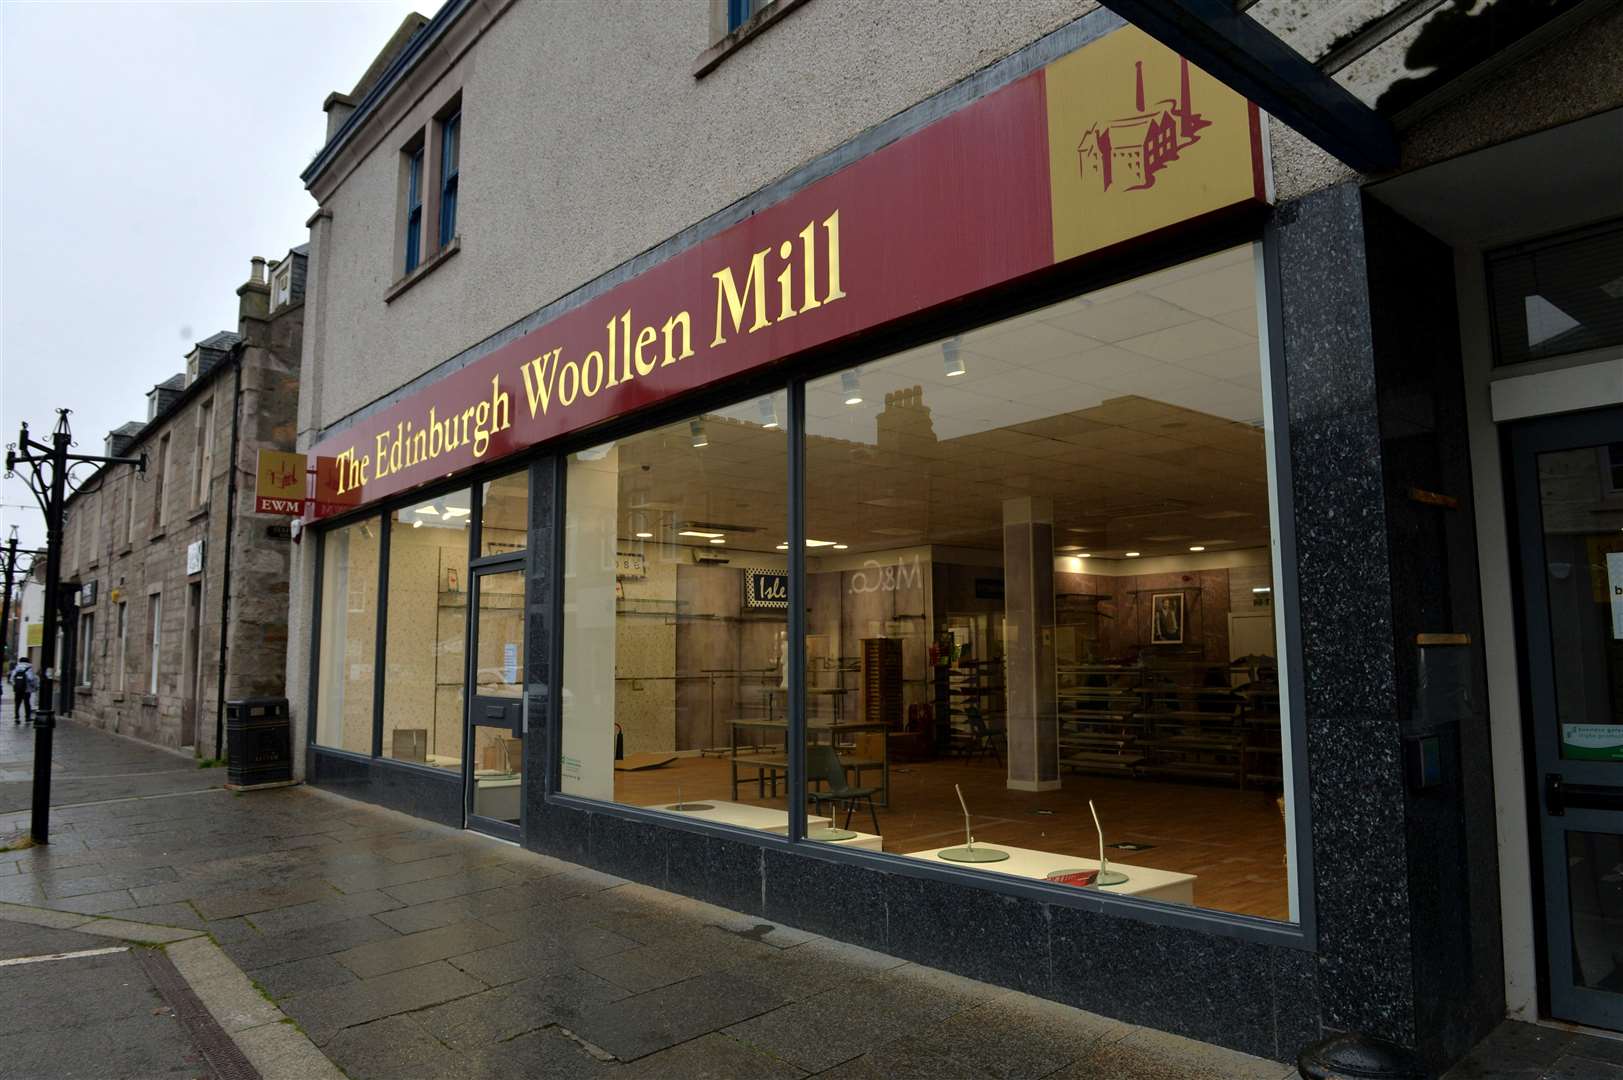 Edinburgh Woollen Mill has already closed a number of stores, including its Dingwall branch in October last year.